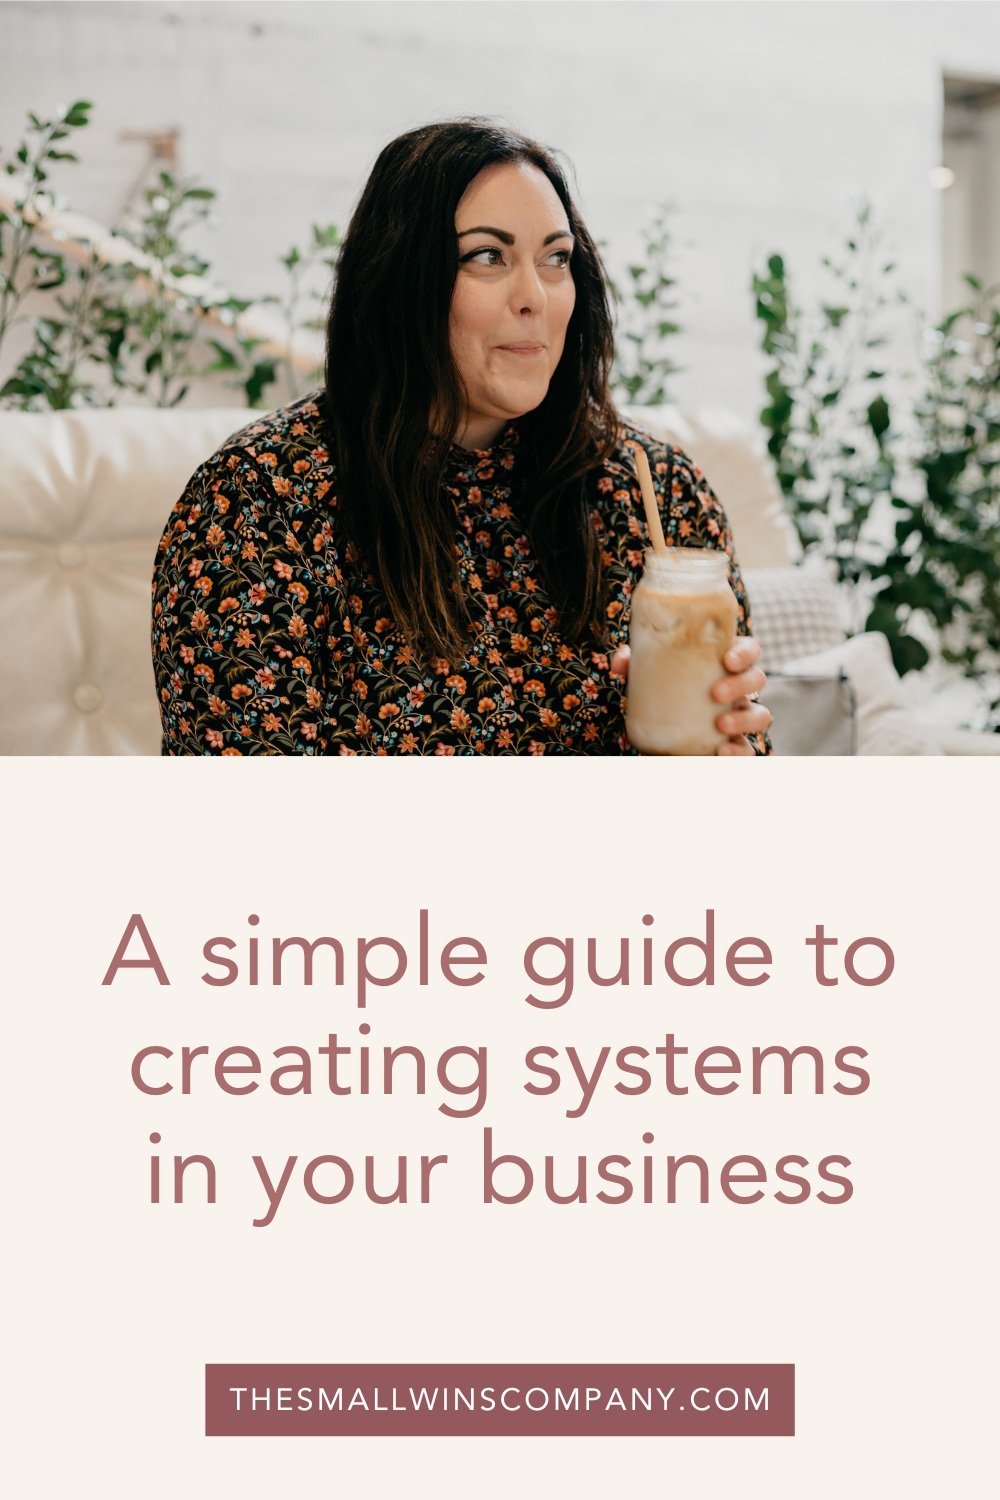 Simple guide to creating systems in your business